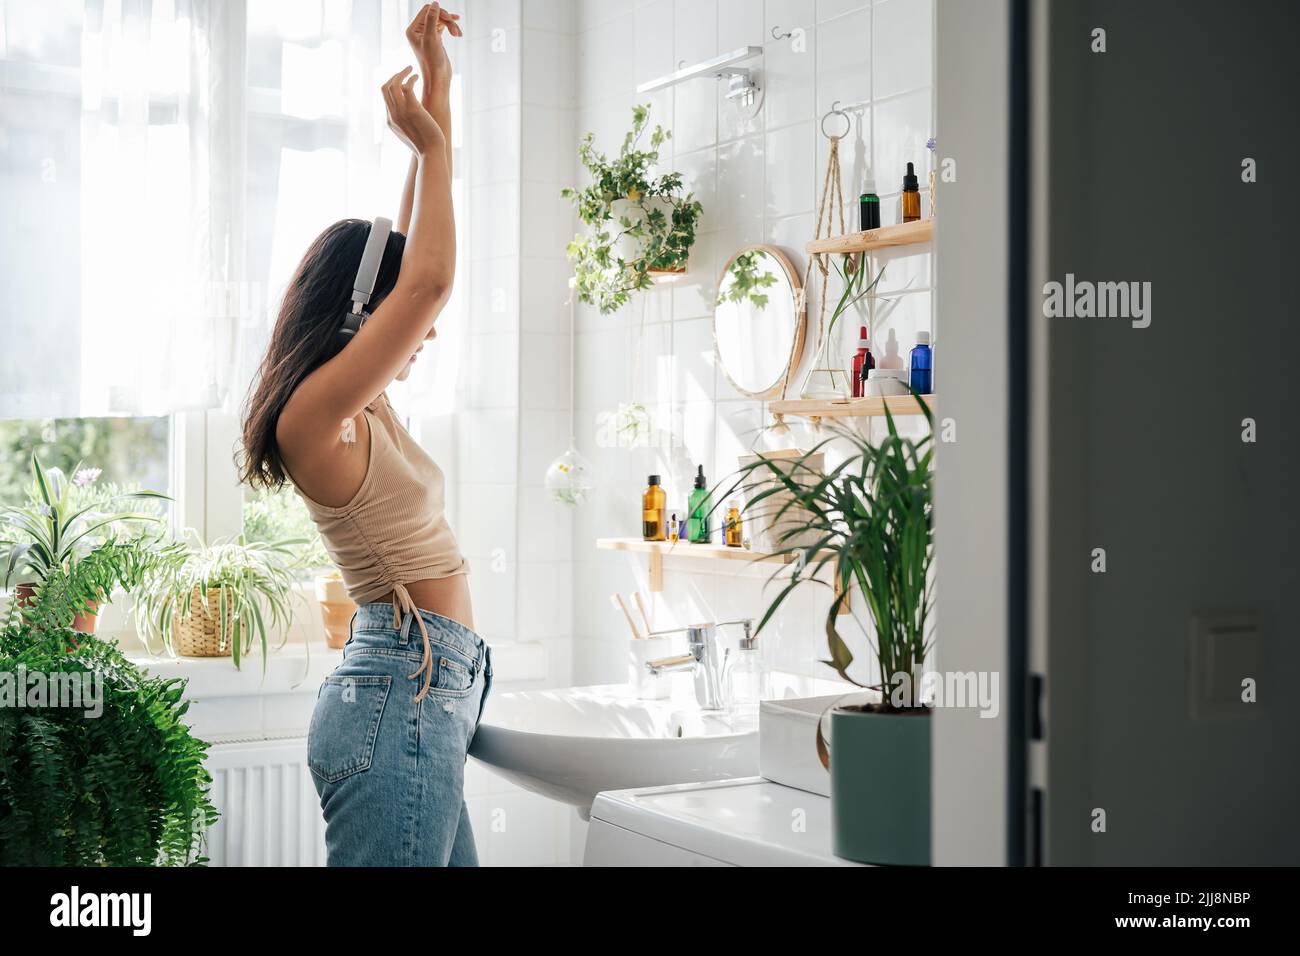 Young hispanic woman dancing with headphones in bathroom. Body positivity, confort hime zone, wellness and lifestyle Stock Photo